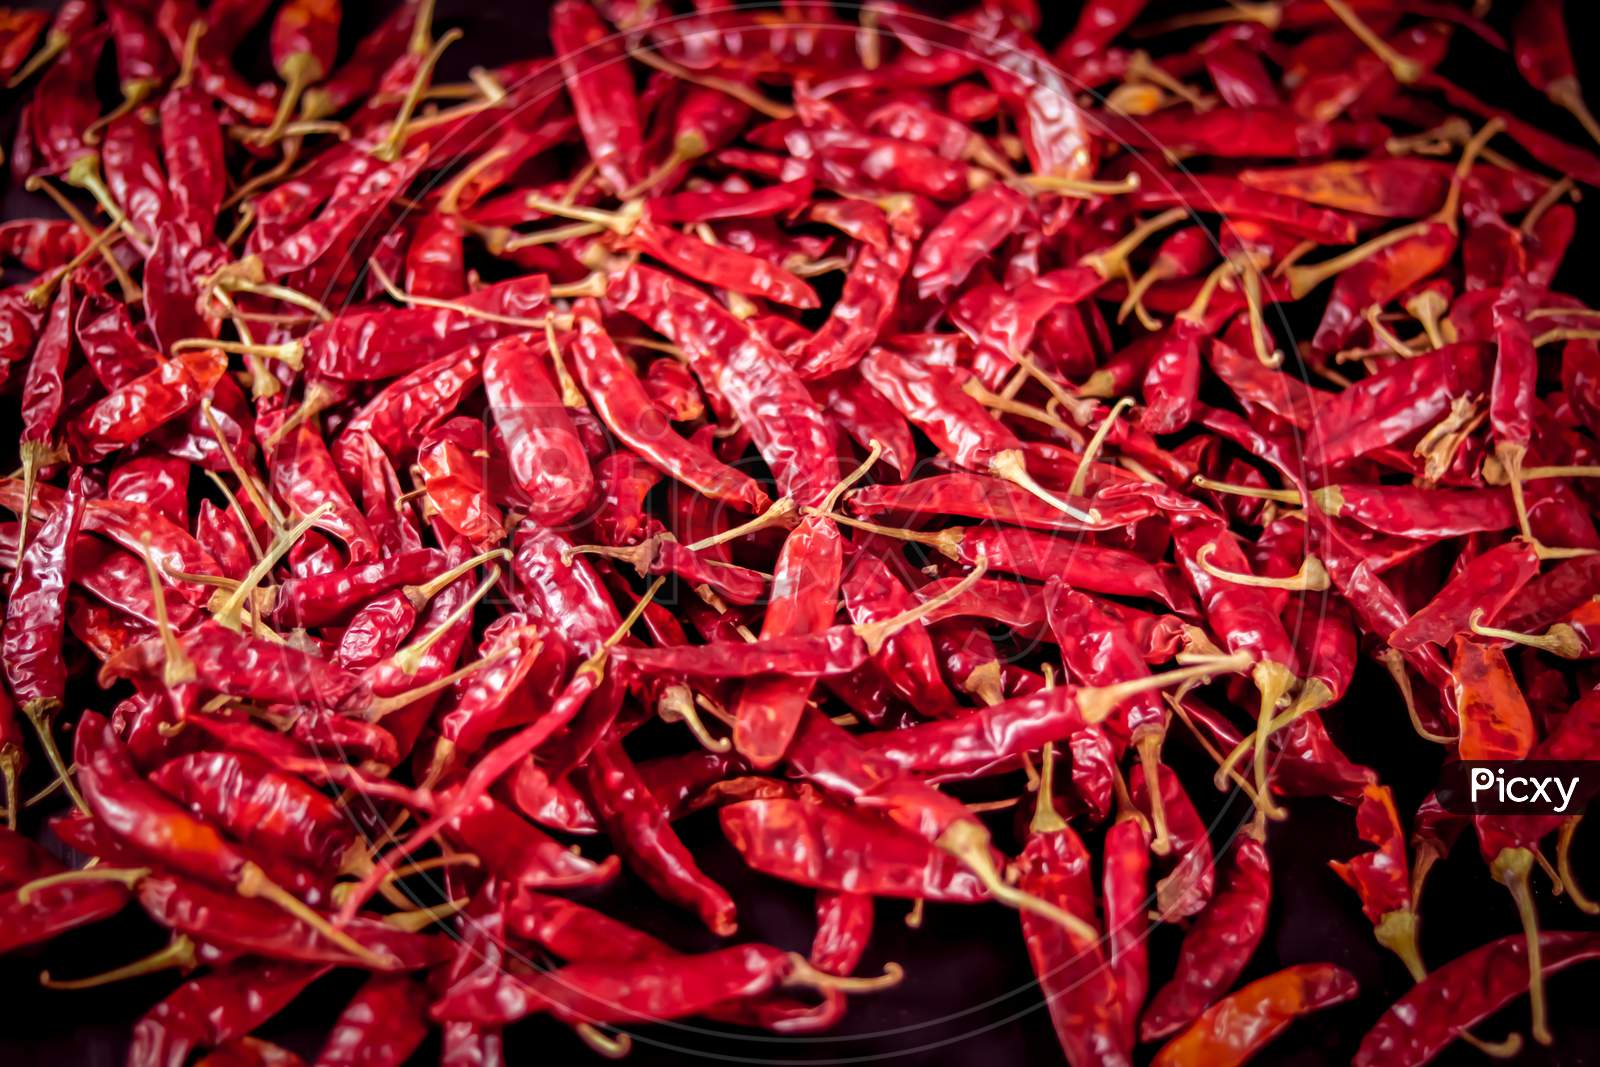 Dry Chilli Peppers,Spicy Seasoning,Lot Of Dried Chili As A Food Background,Dried Red Peppers On A Wooden Table,Red Dry Chili Pepper Background,Dry Paprika Hd Footage